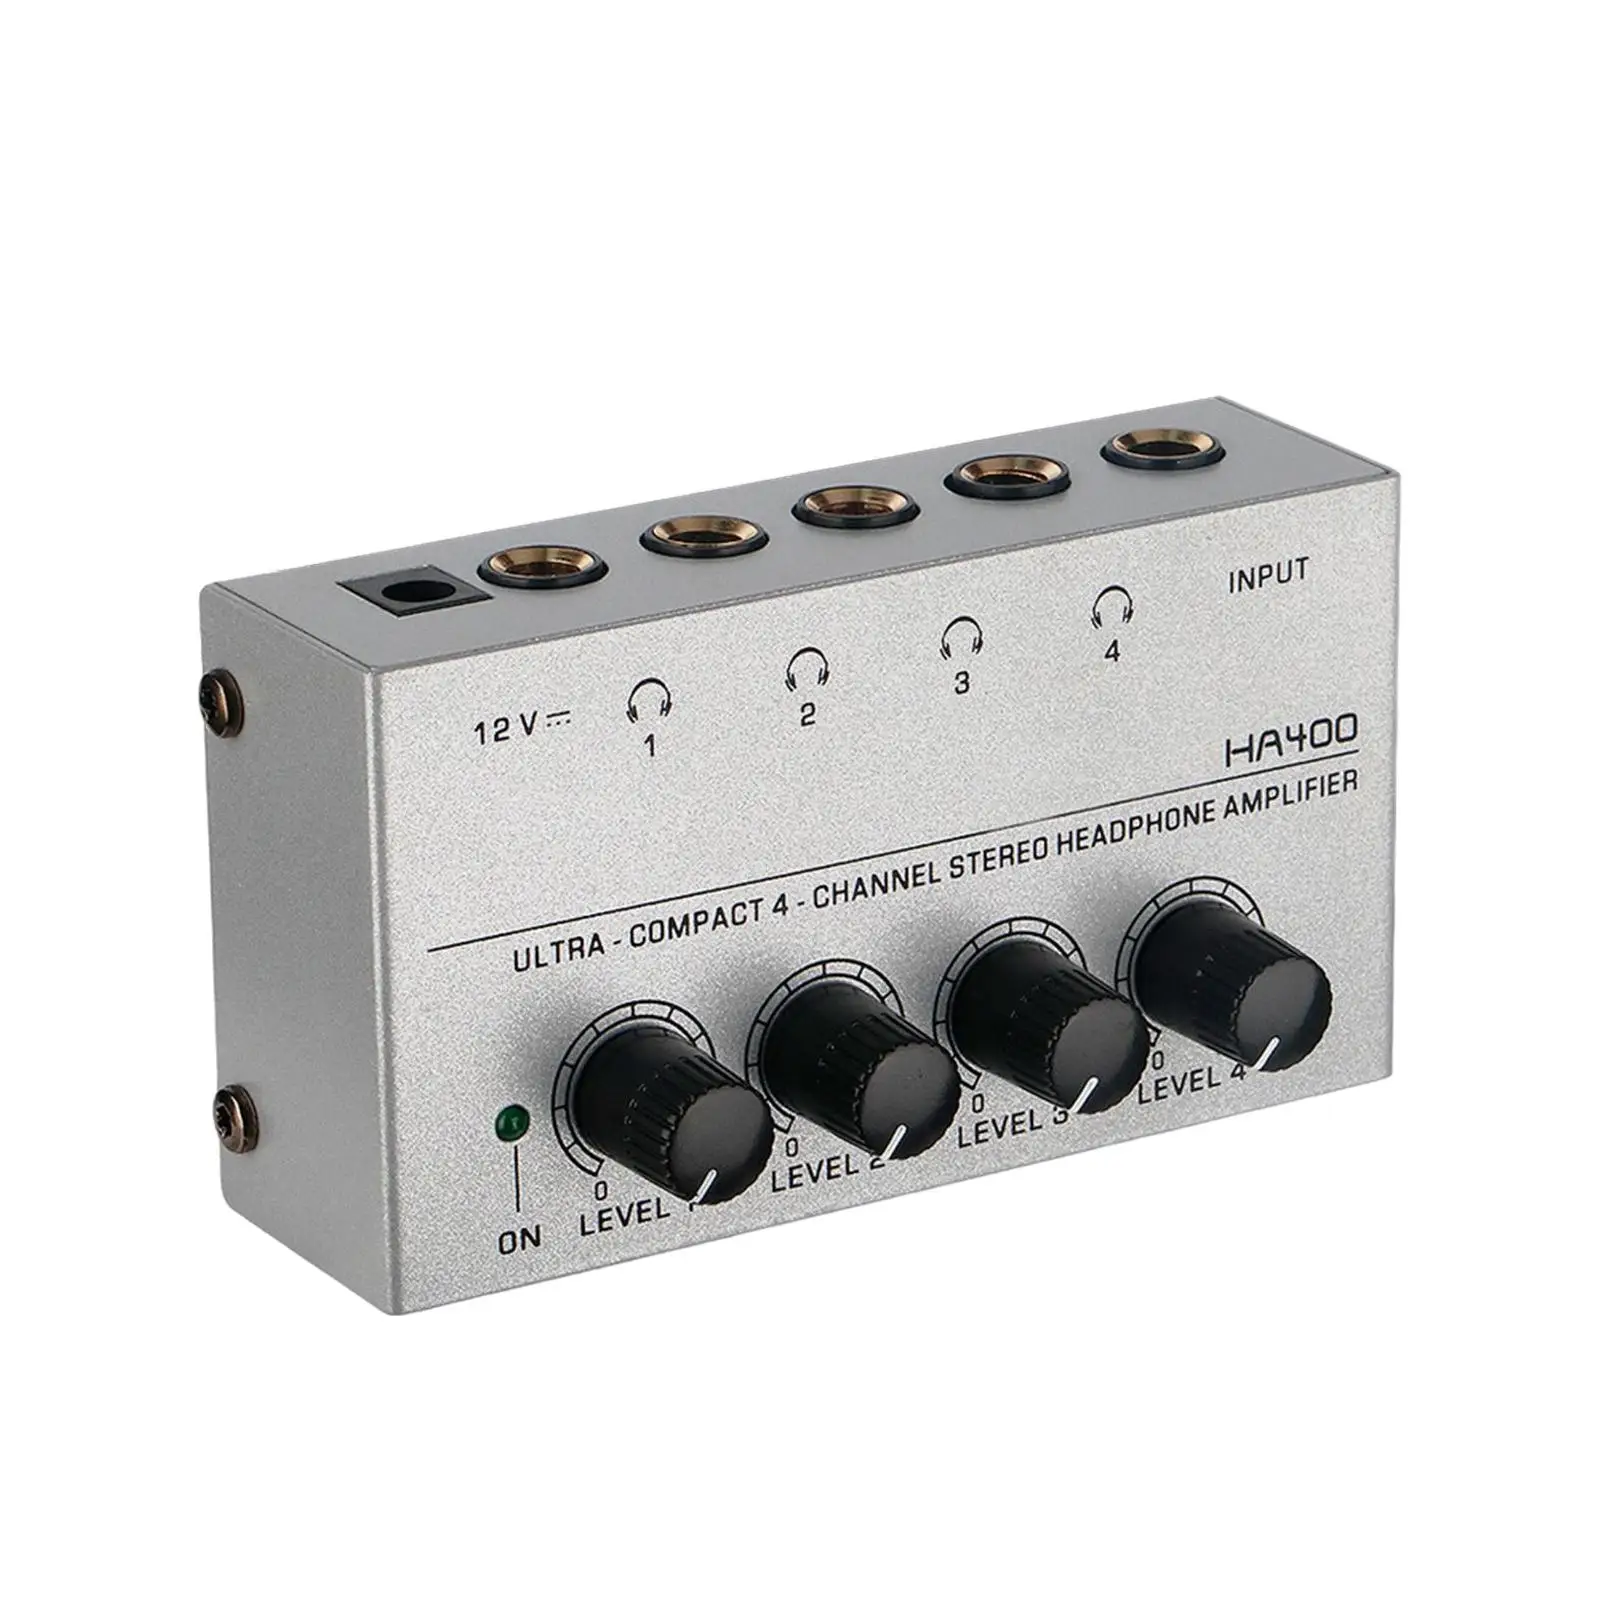 4 Channel Headphone Amp Sound Mixer Clear Sound Desktop Amp Stereo Compact for sound Reinforcement Home Recording Studio